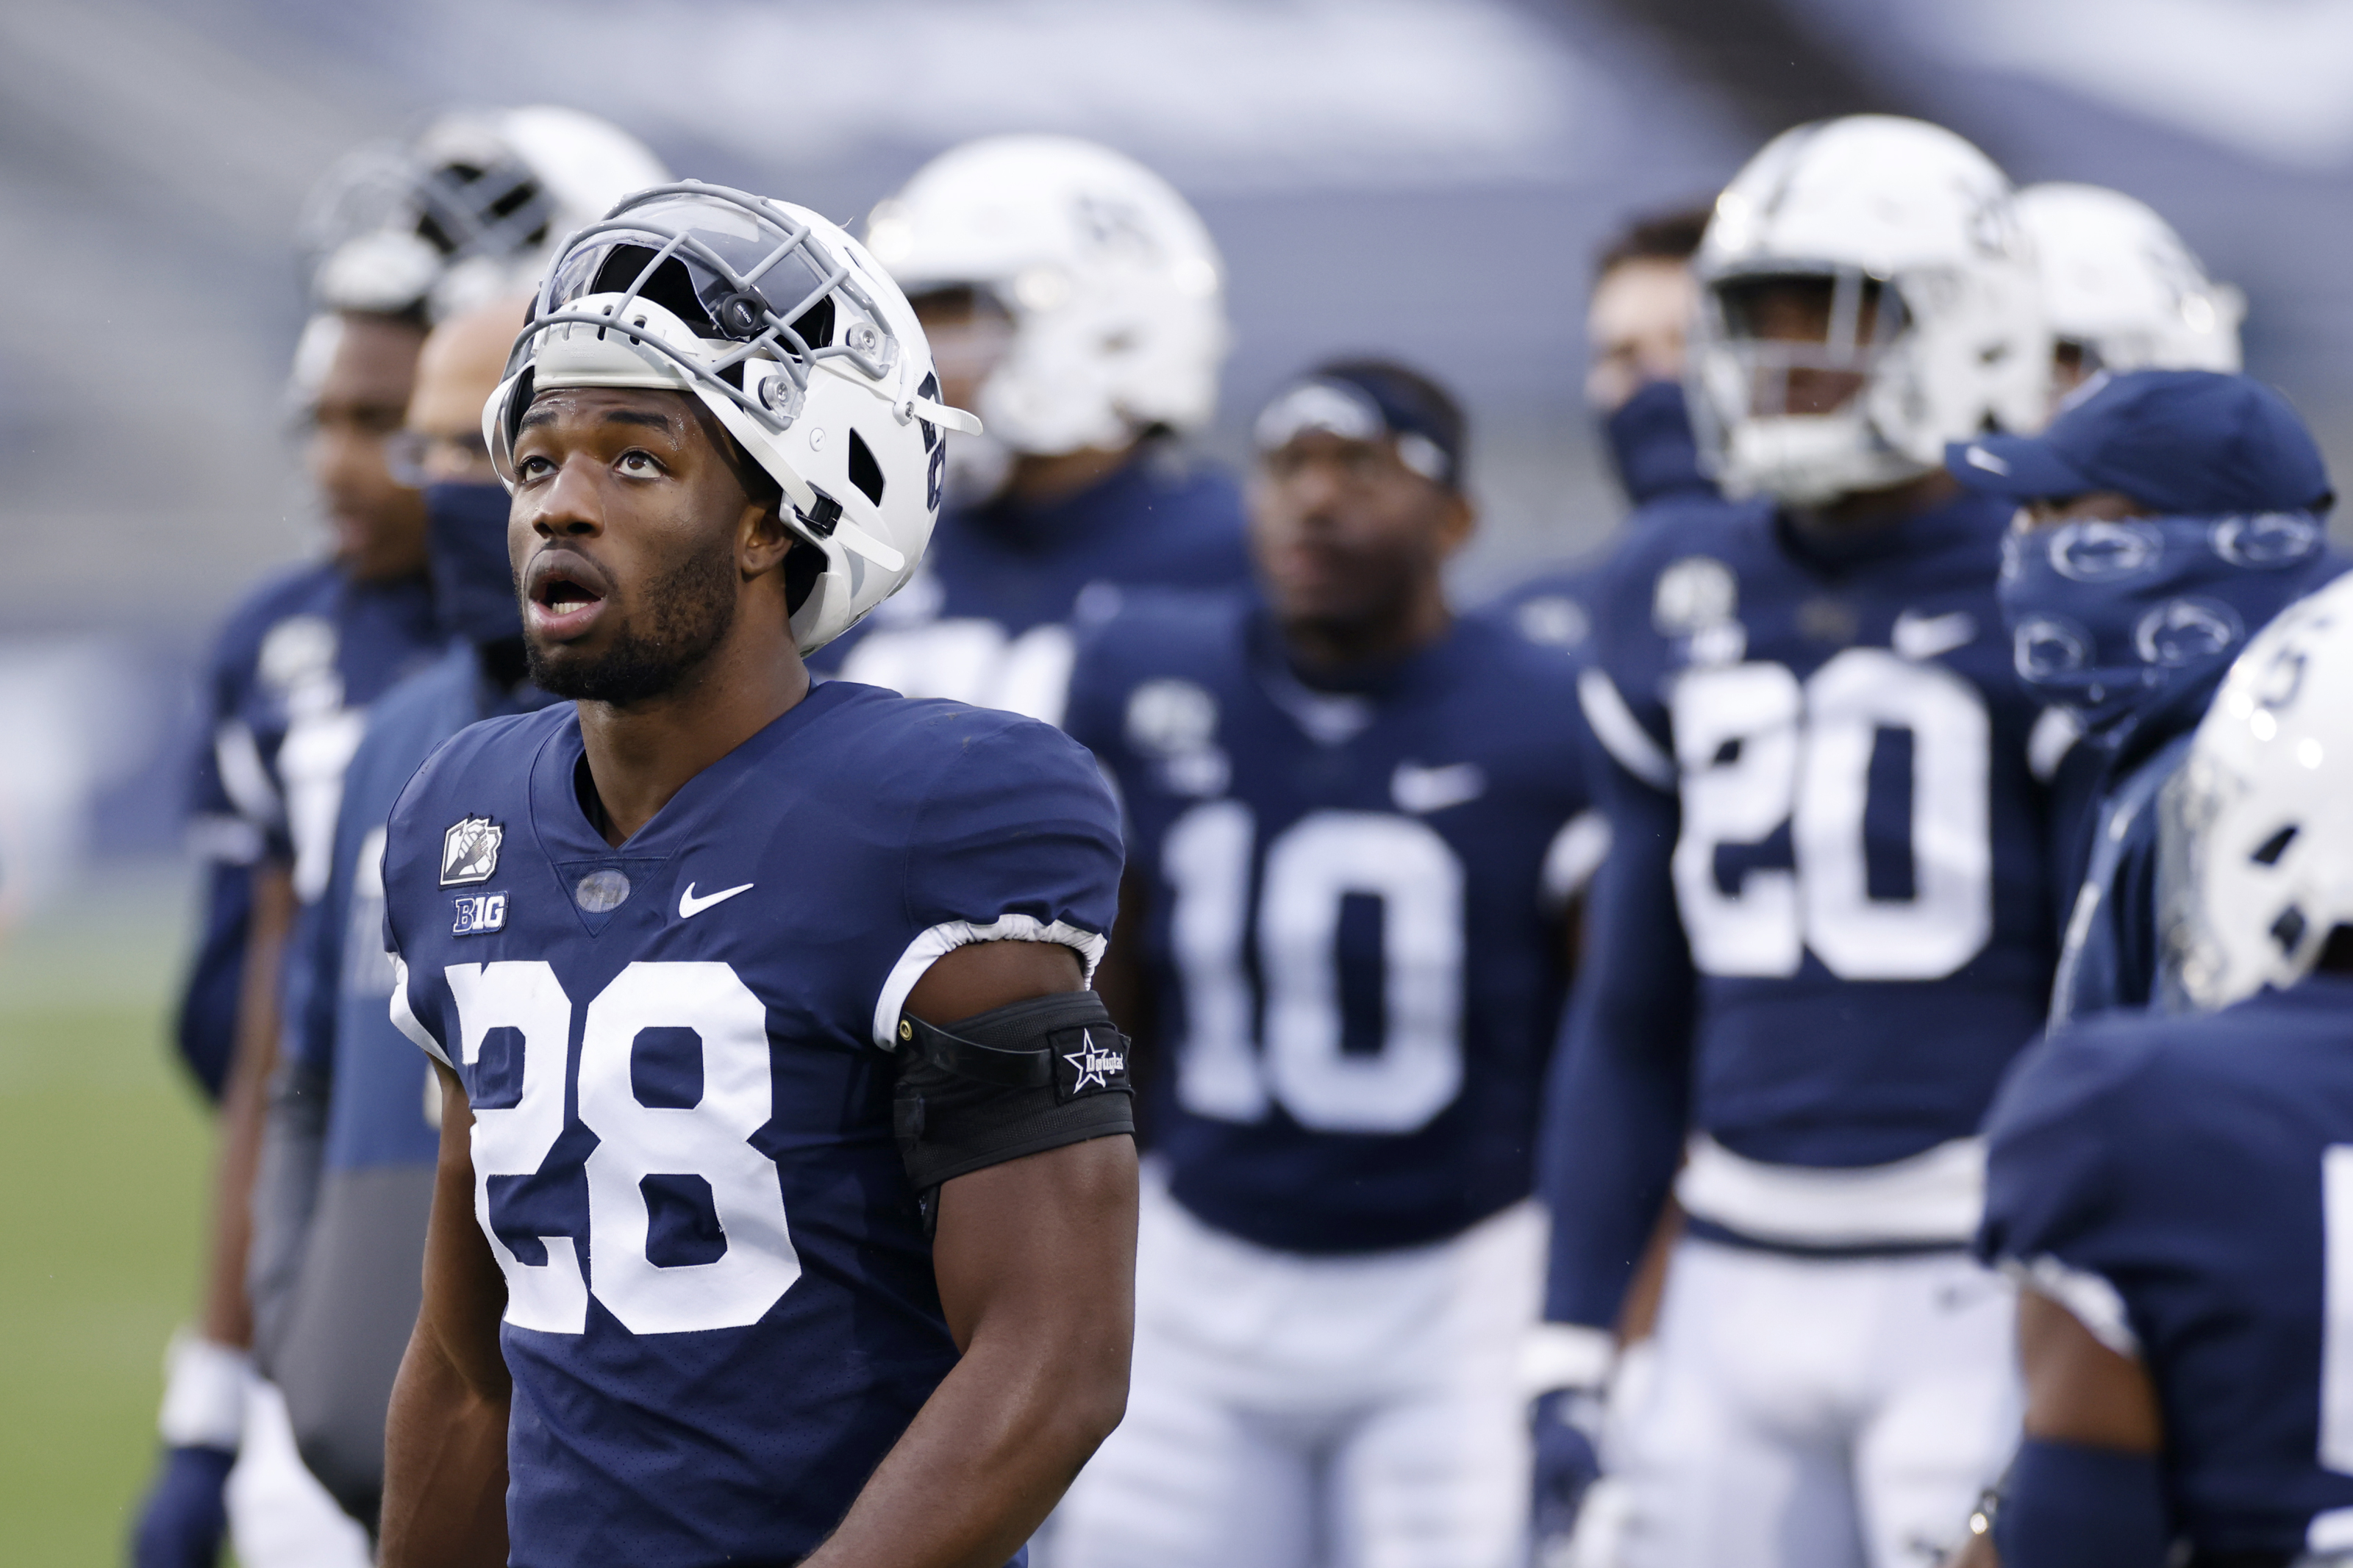 Penn State Football: 3 NFL Draft fits for Jayson Oweh